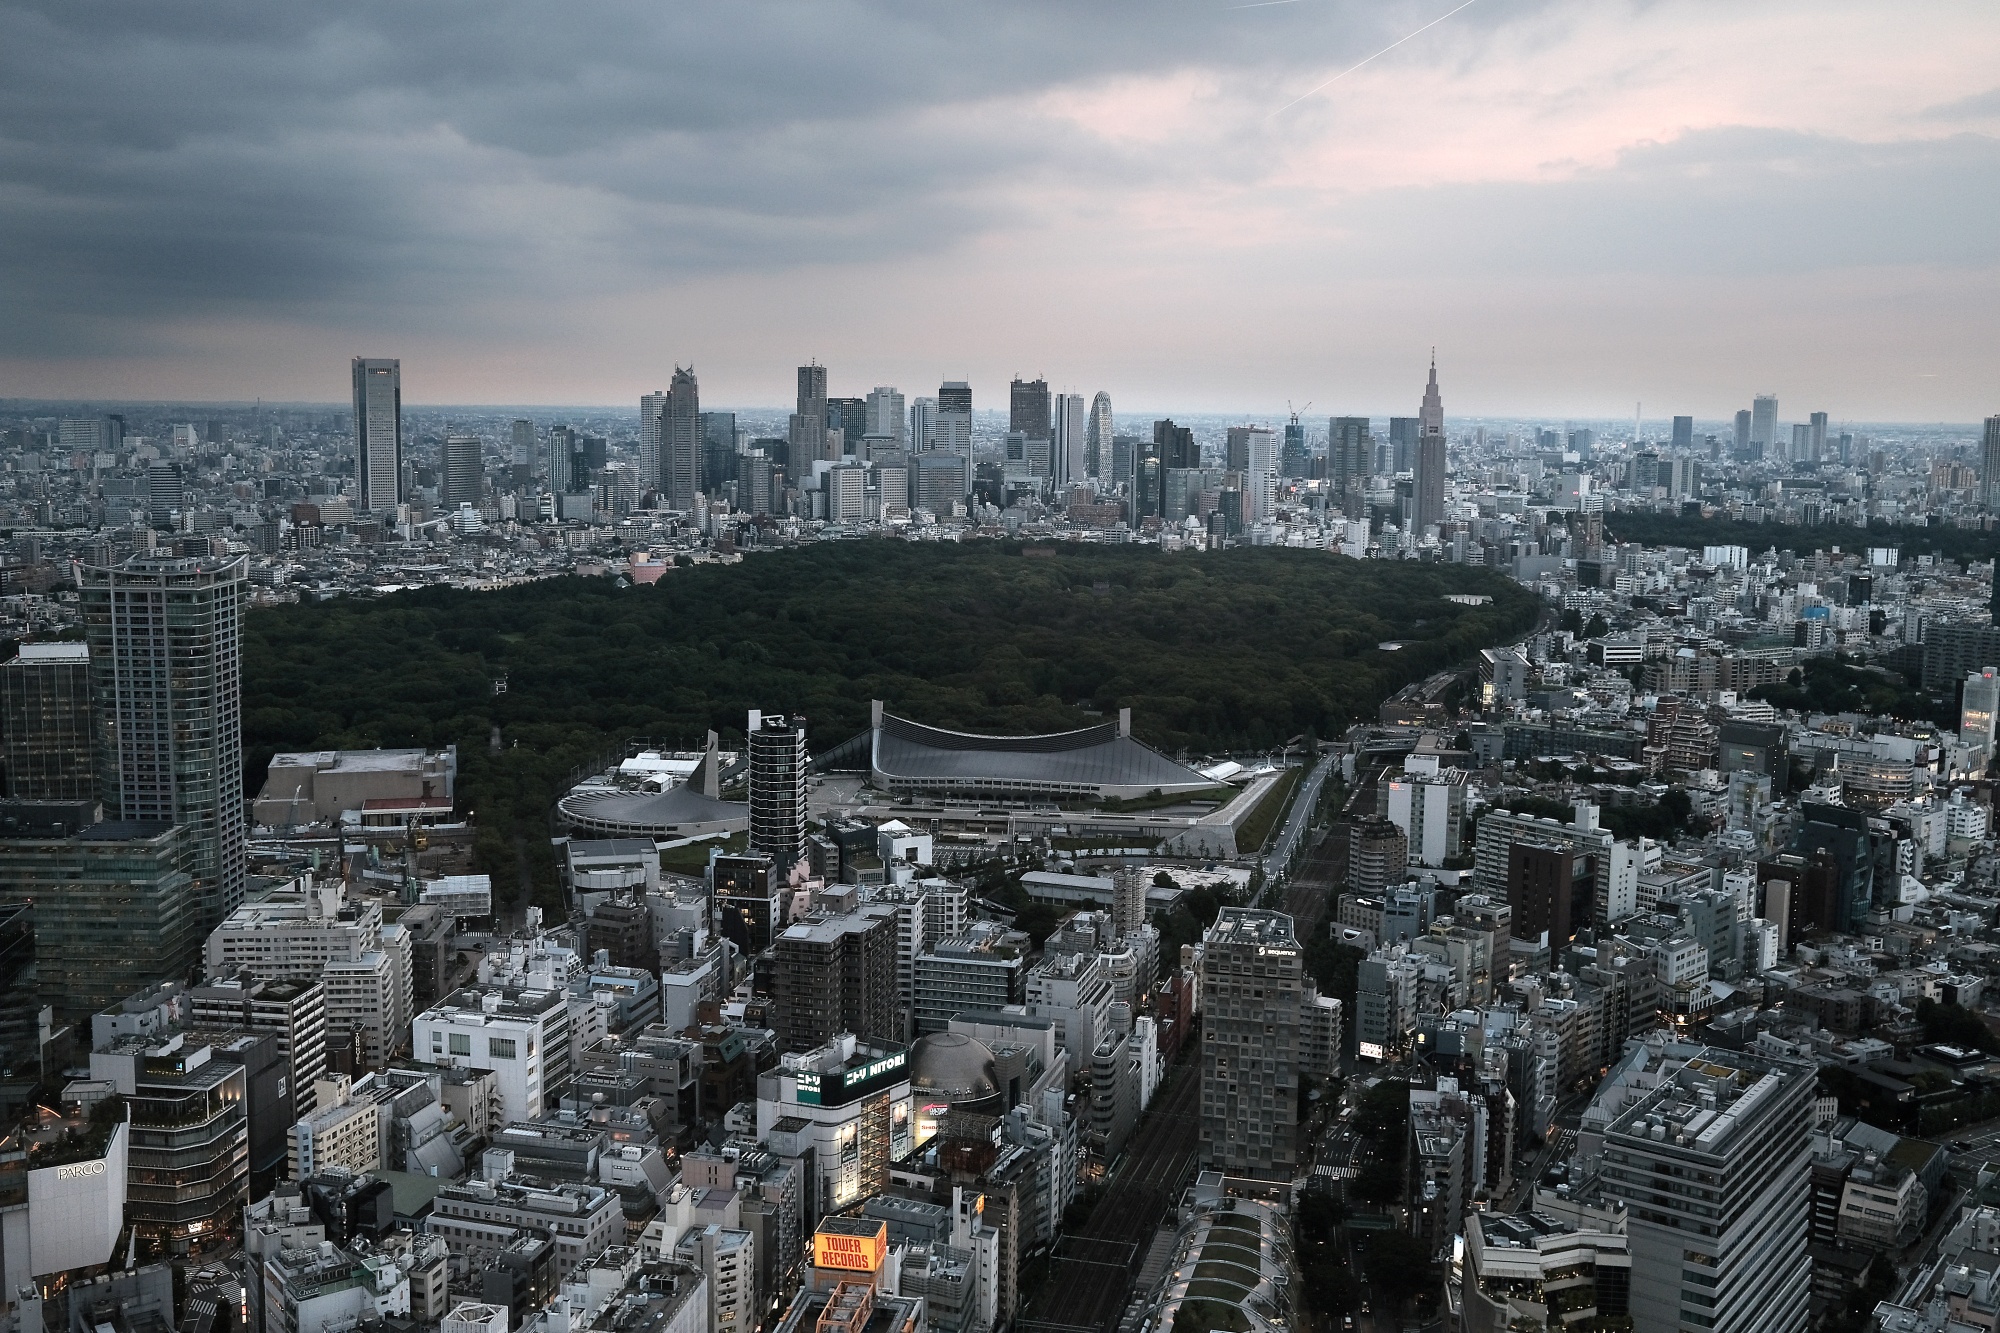 View of urban sprawl in western Tokyo from Tokyo Tower (open access